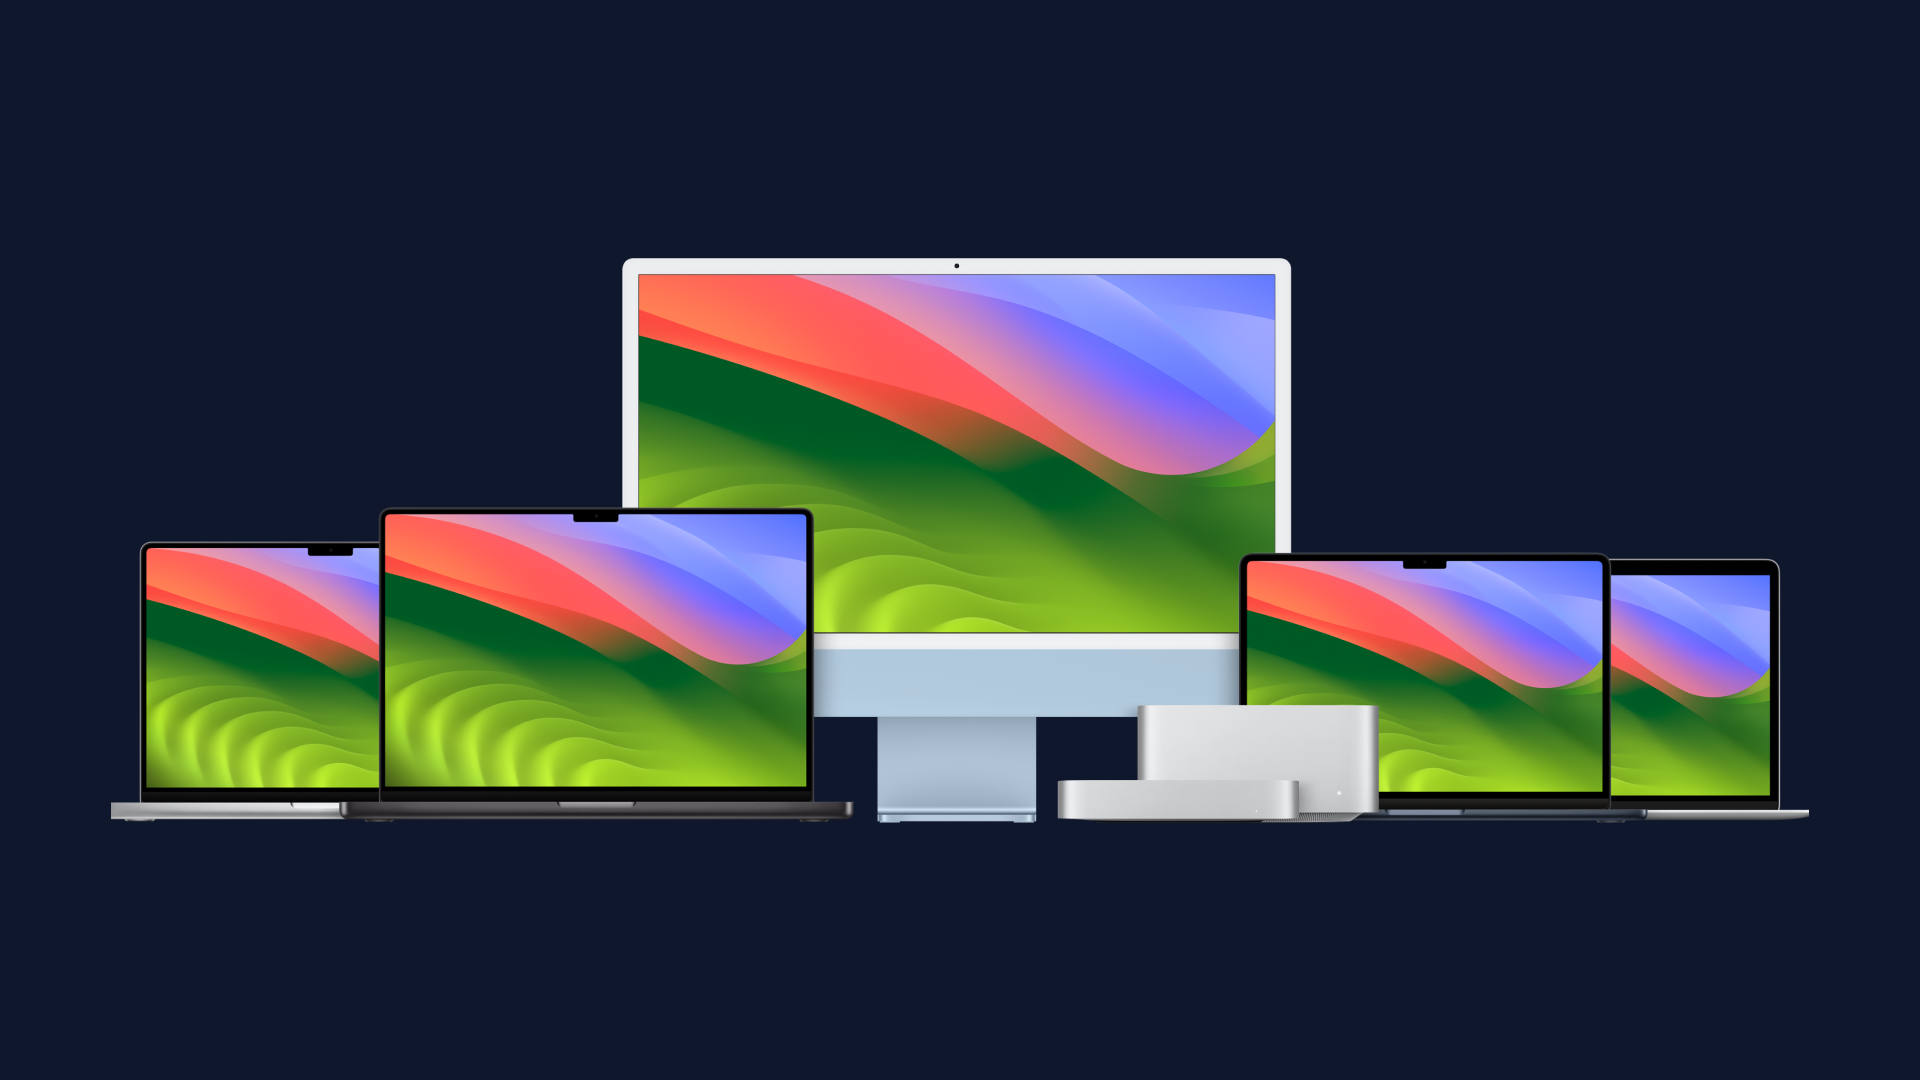 Lineup of Mac products. 